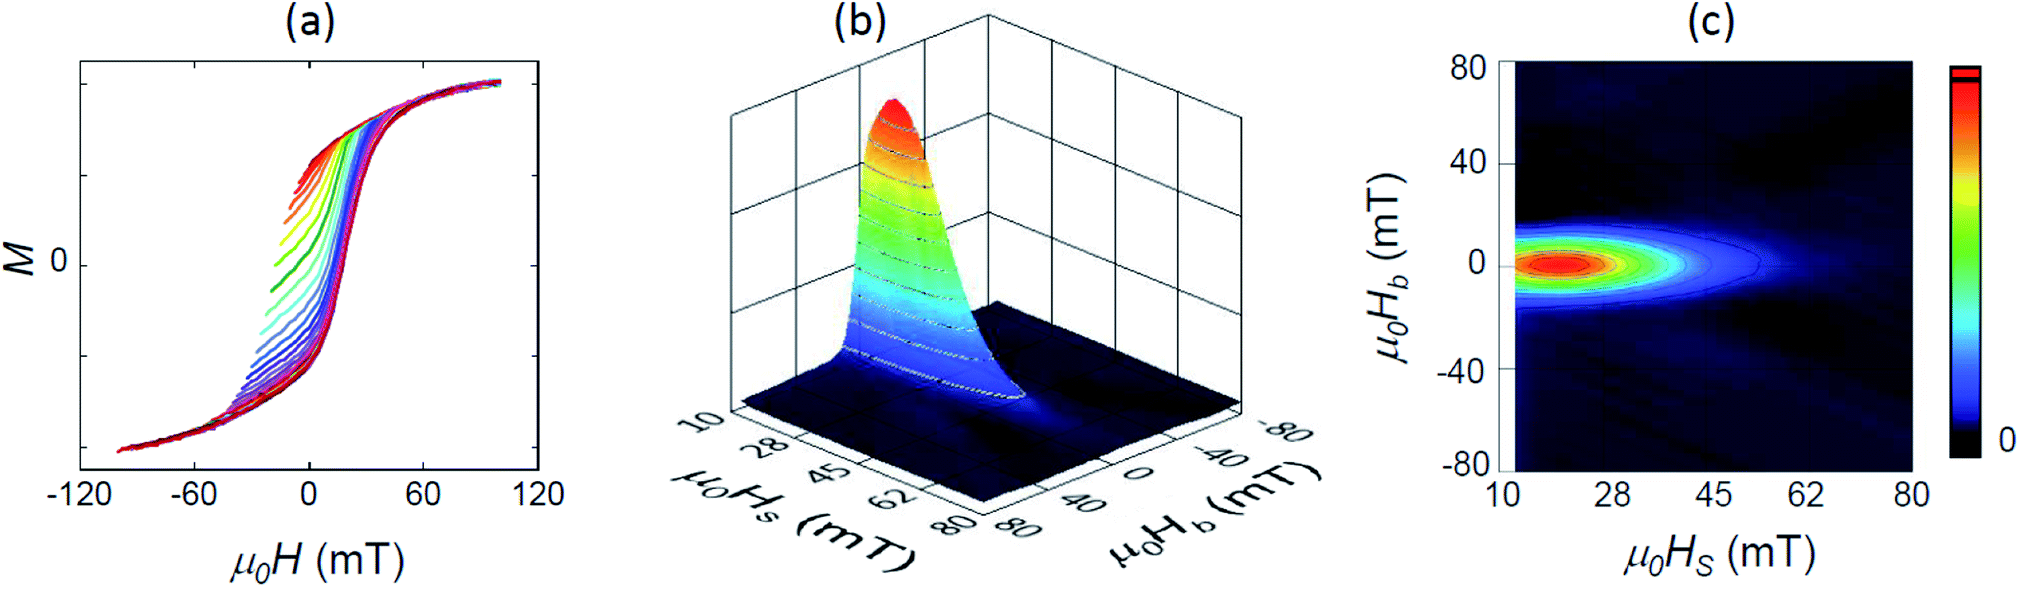 Probing The Stability And Magnetic Properties Of Magnetosome Chains In Freeze Dried Magnetotactic Bacteria Nanoscale Advances Rsc Publishing Doi 10 1039 C9nac